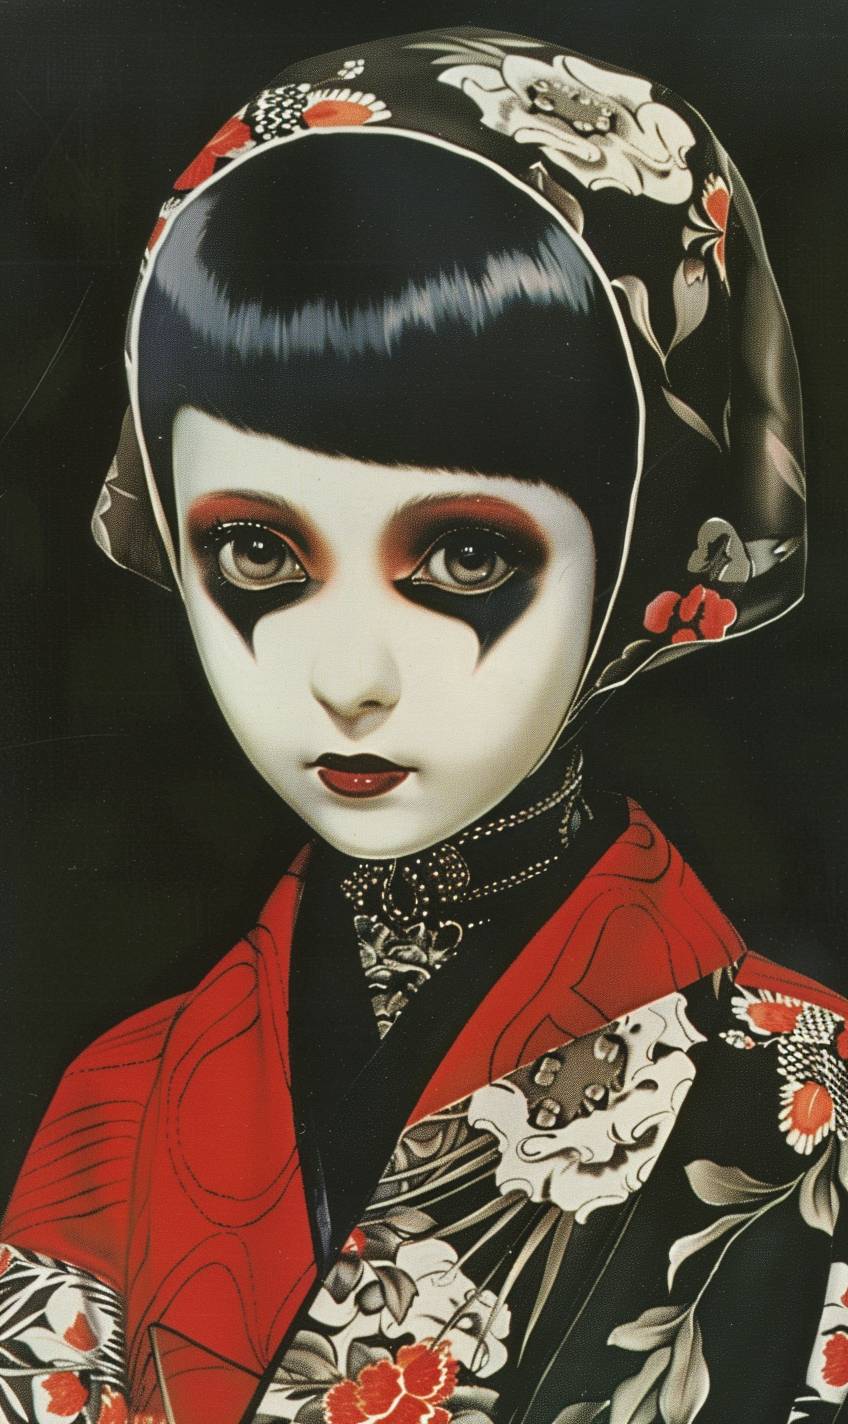 Anime character by Satoshi Kon as depicted by Claude Cahun